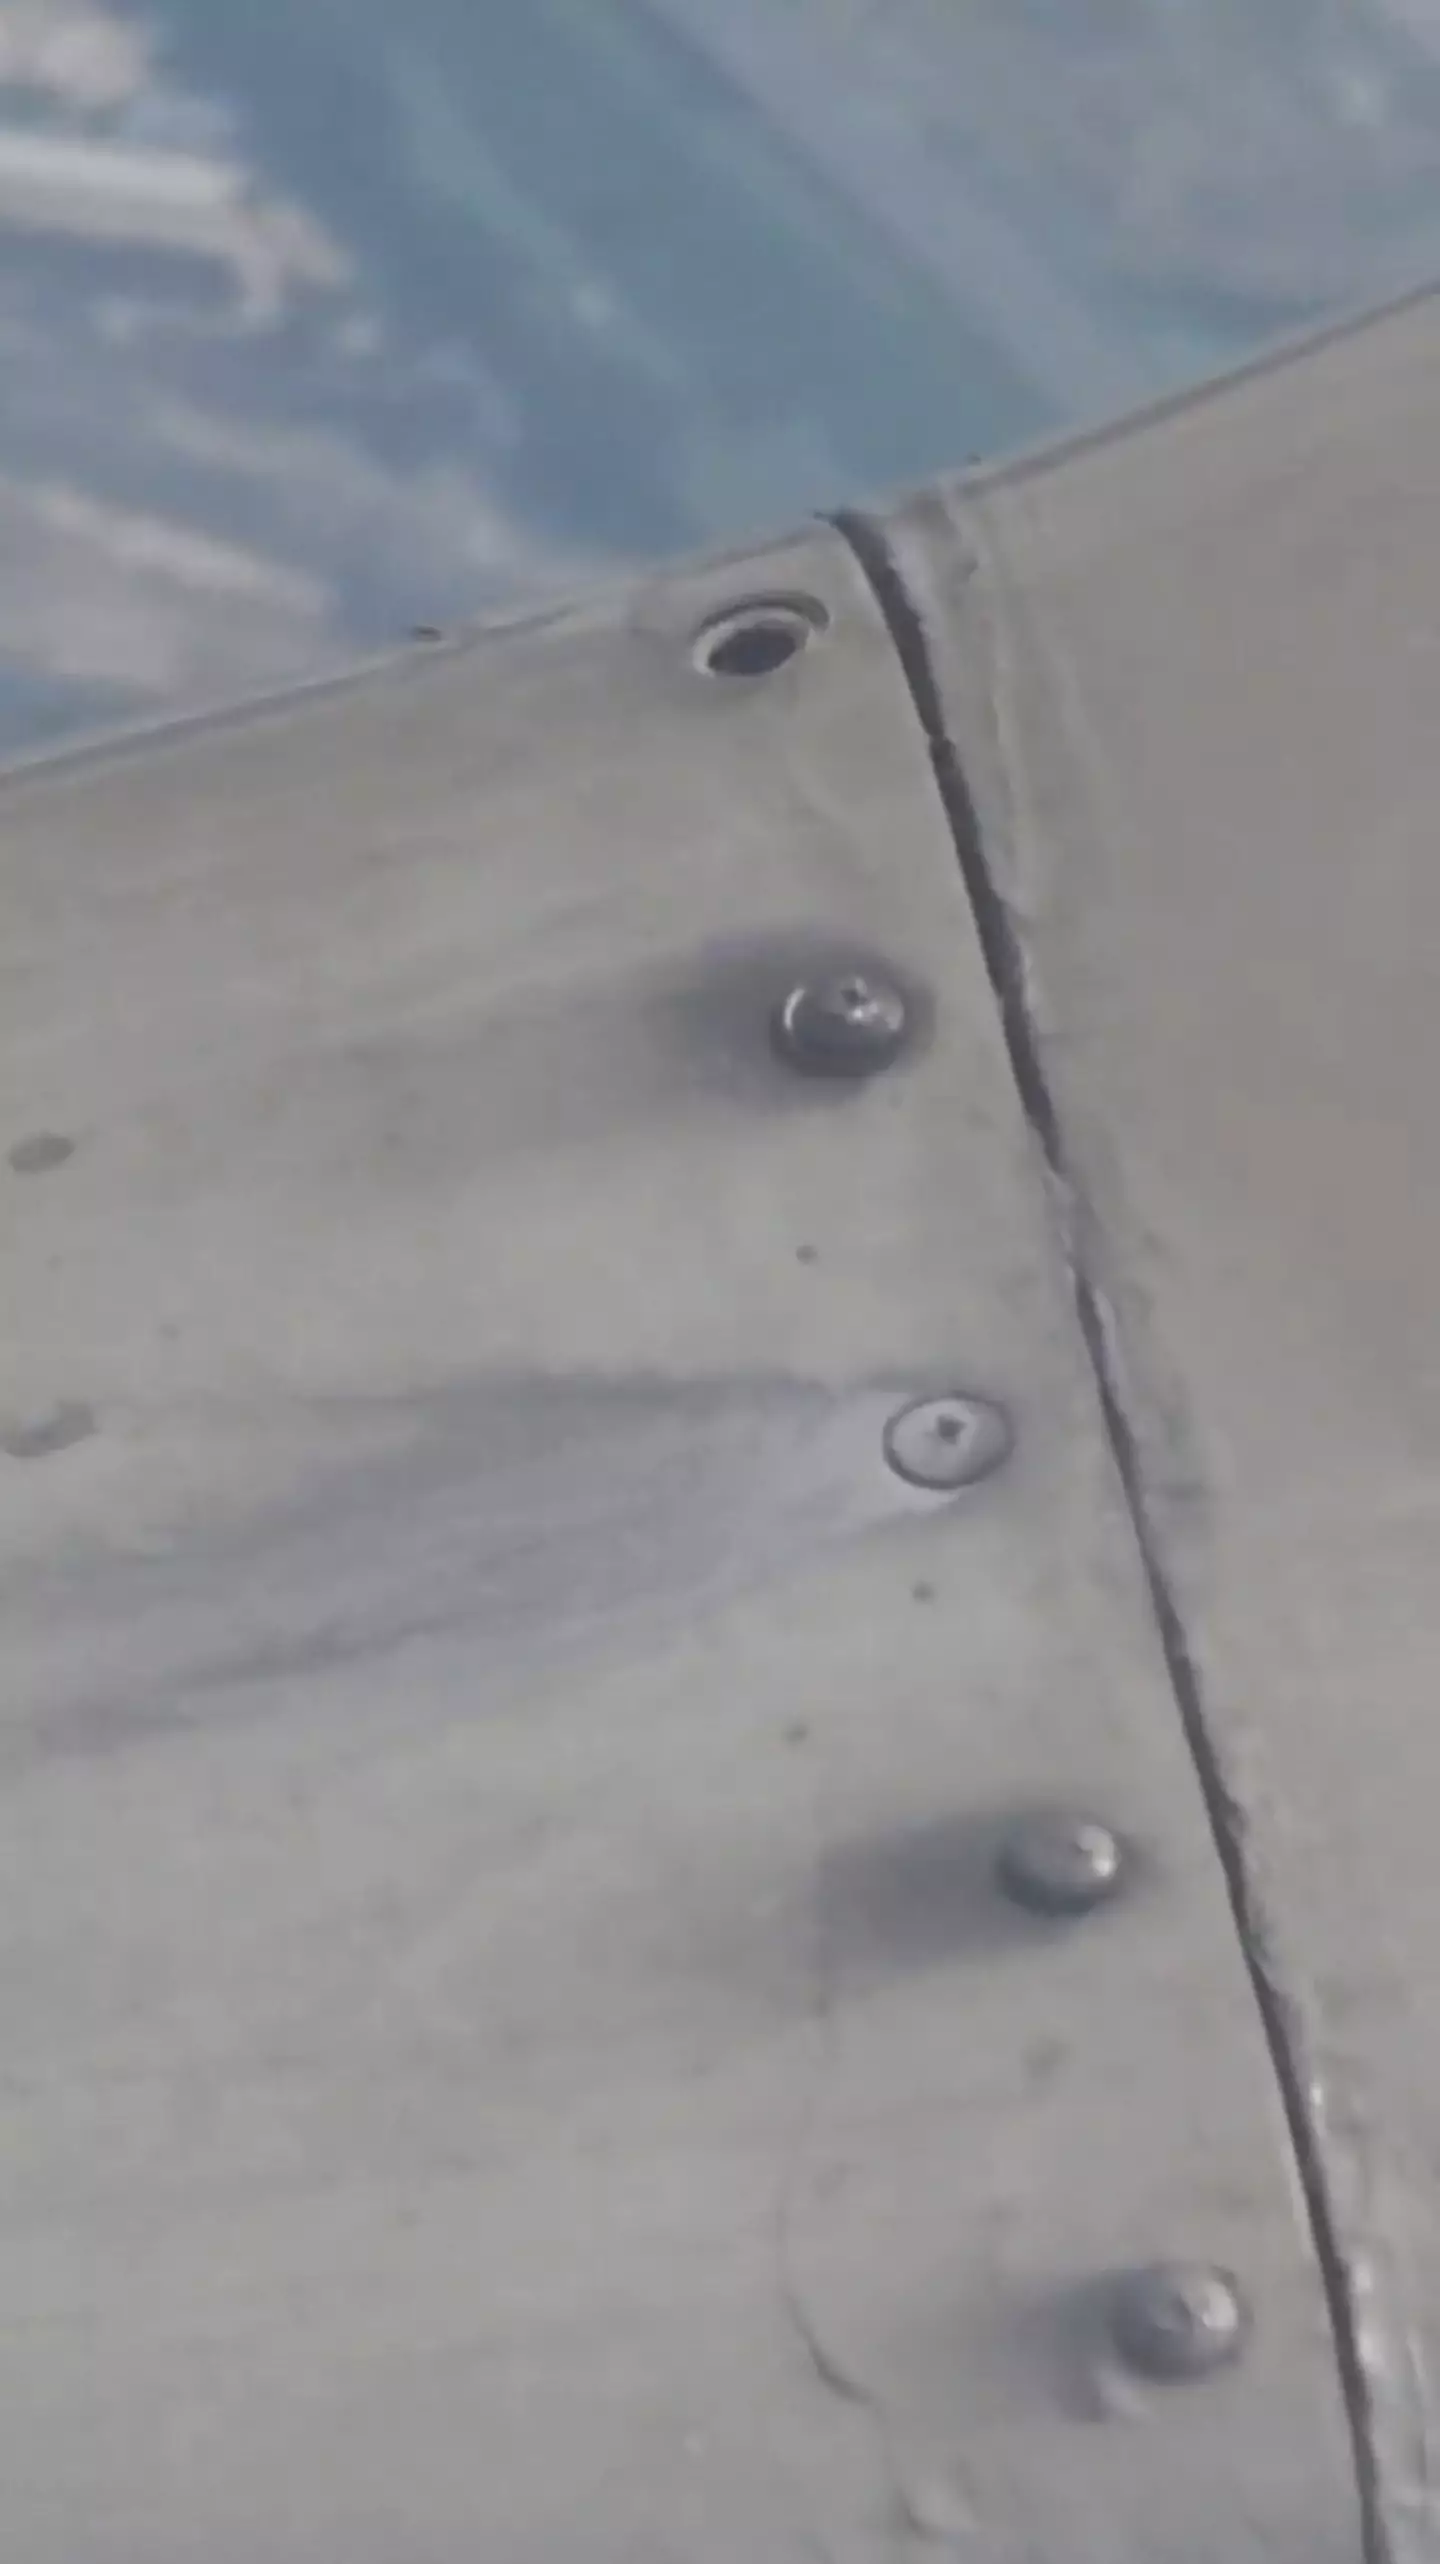 Screws on the aircraft's wing became loose.